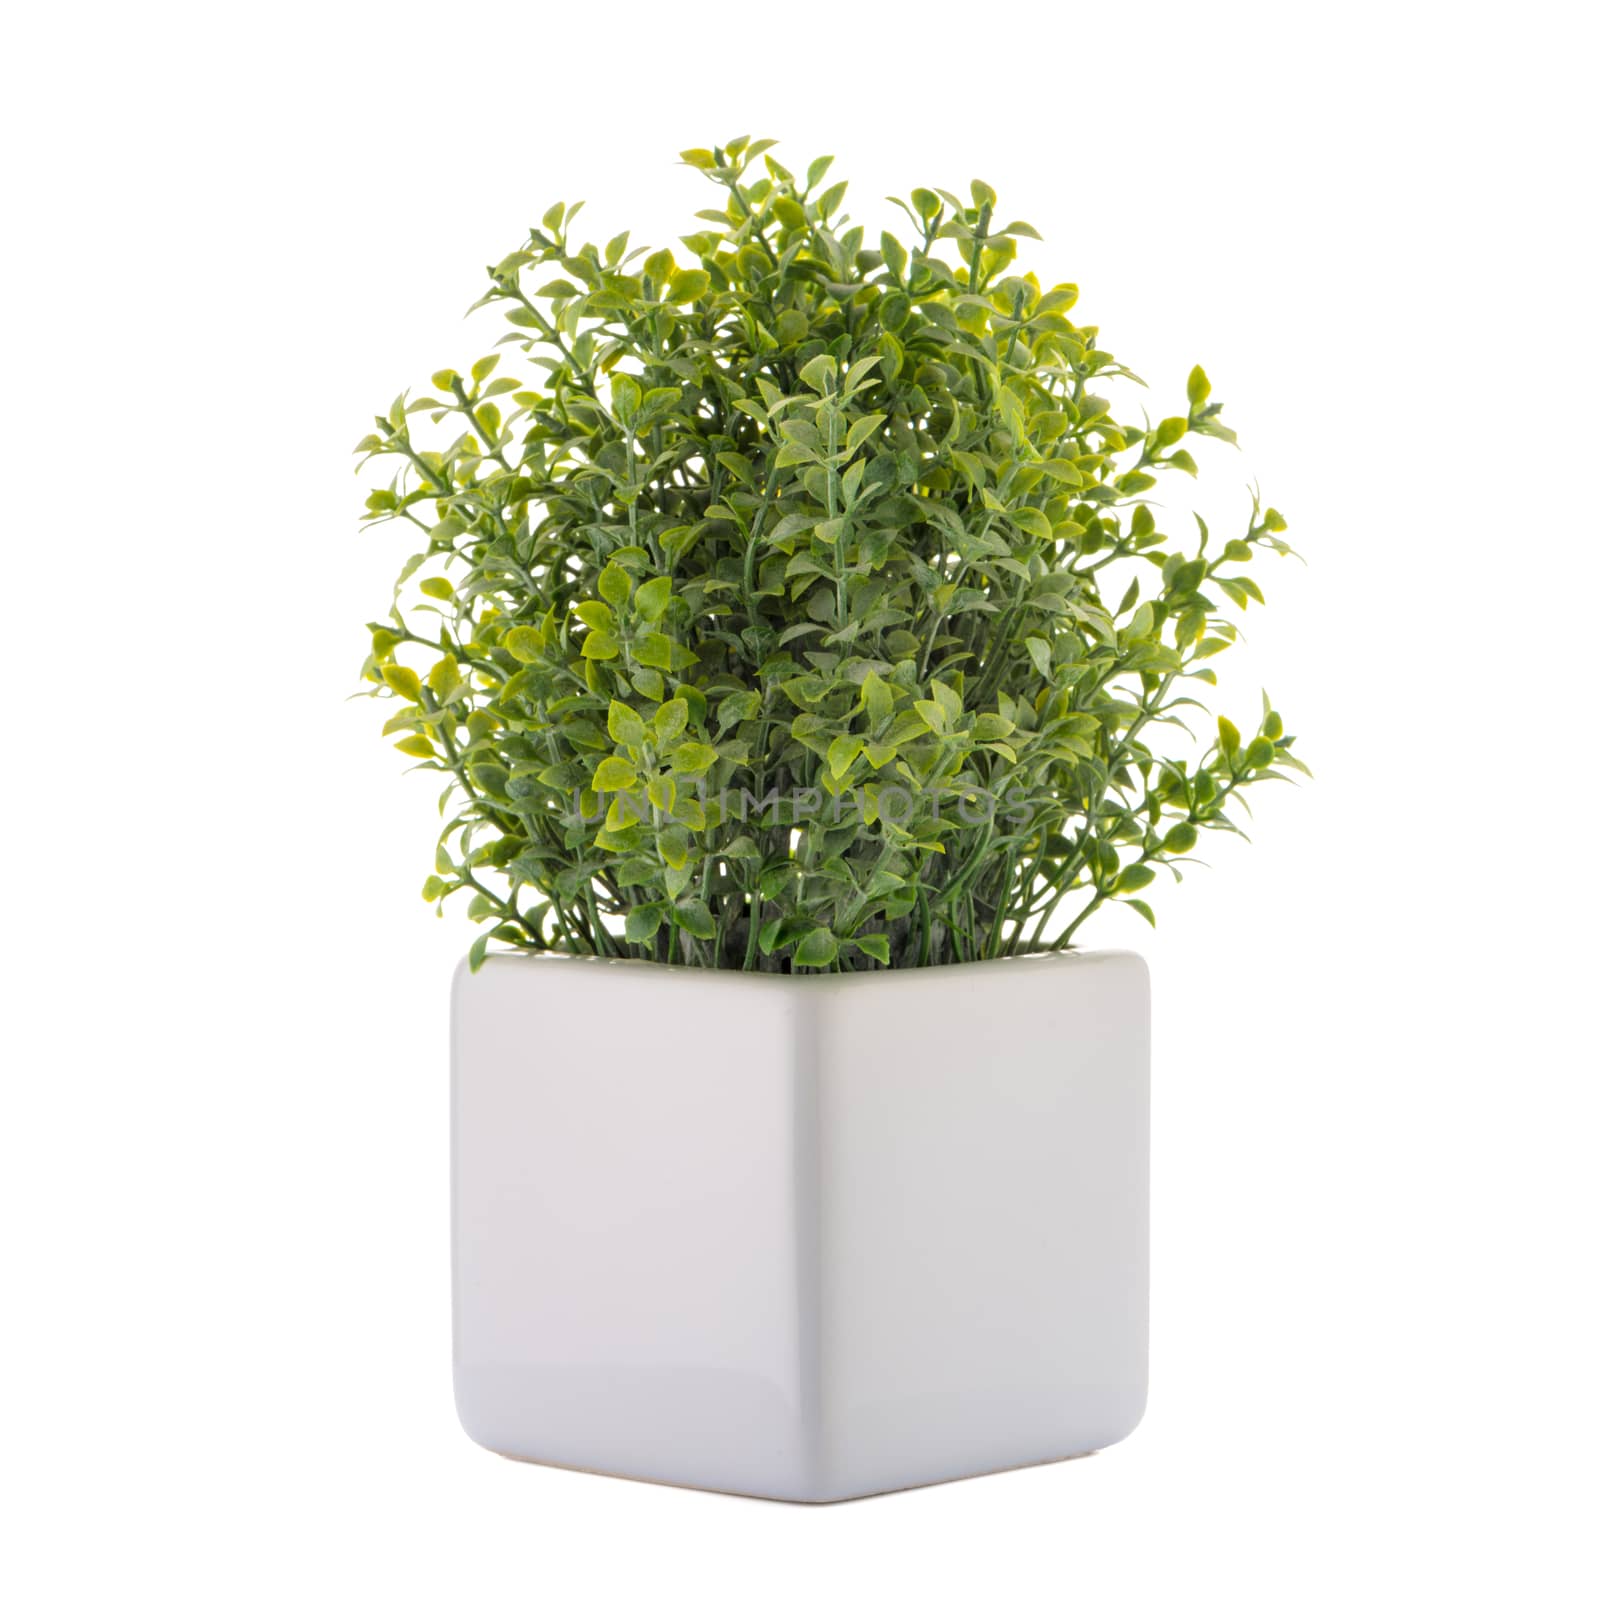 Small decorative plant by homydesign